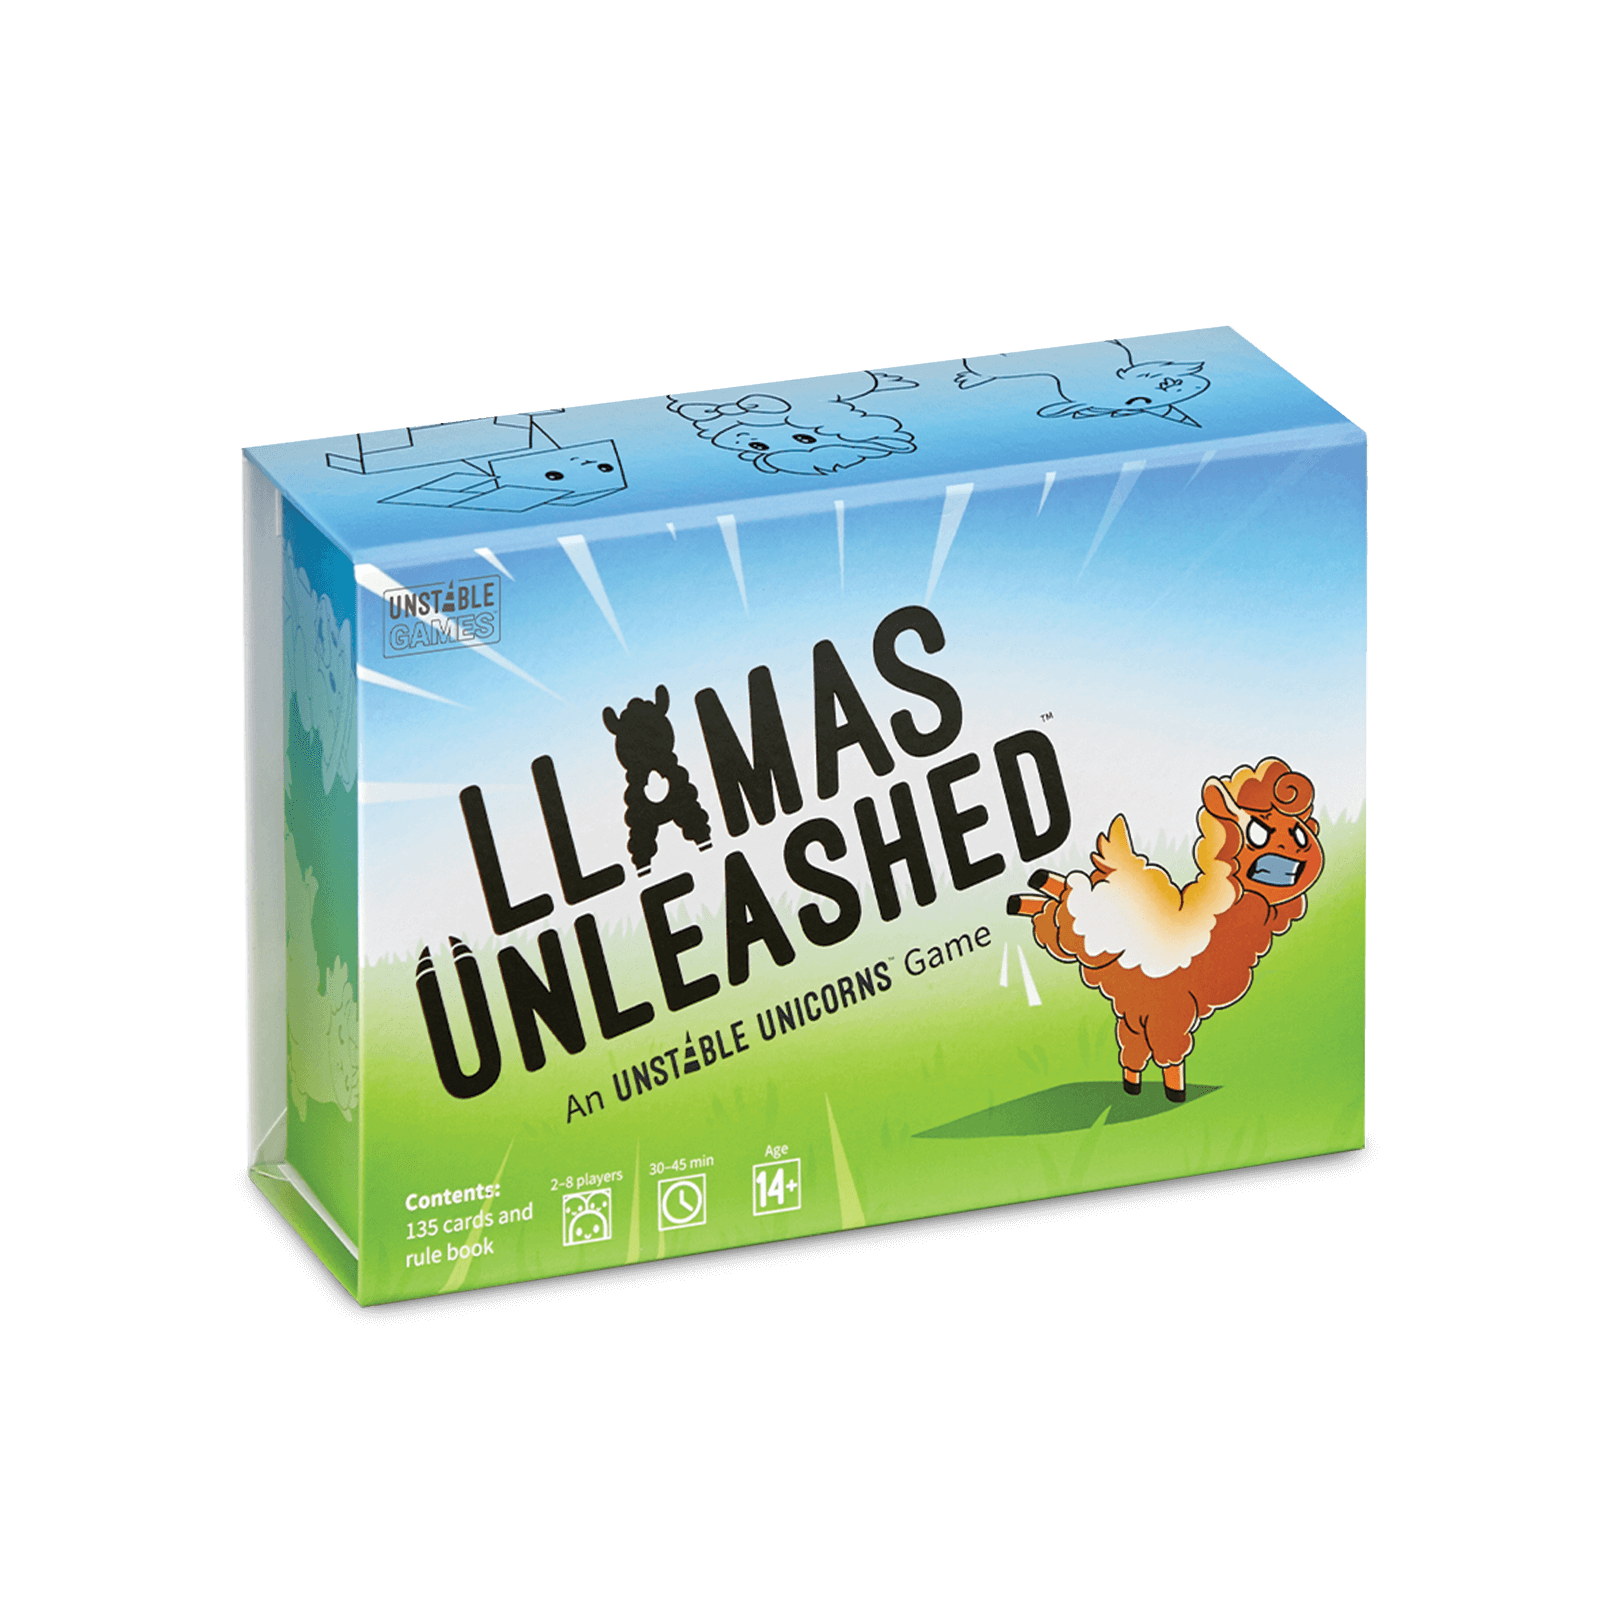 Llamas Unleashed - An Unstable Unicorns Game - Bards & Cards